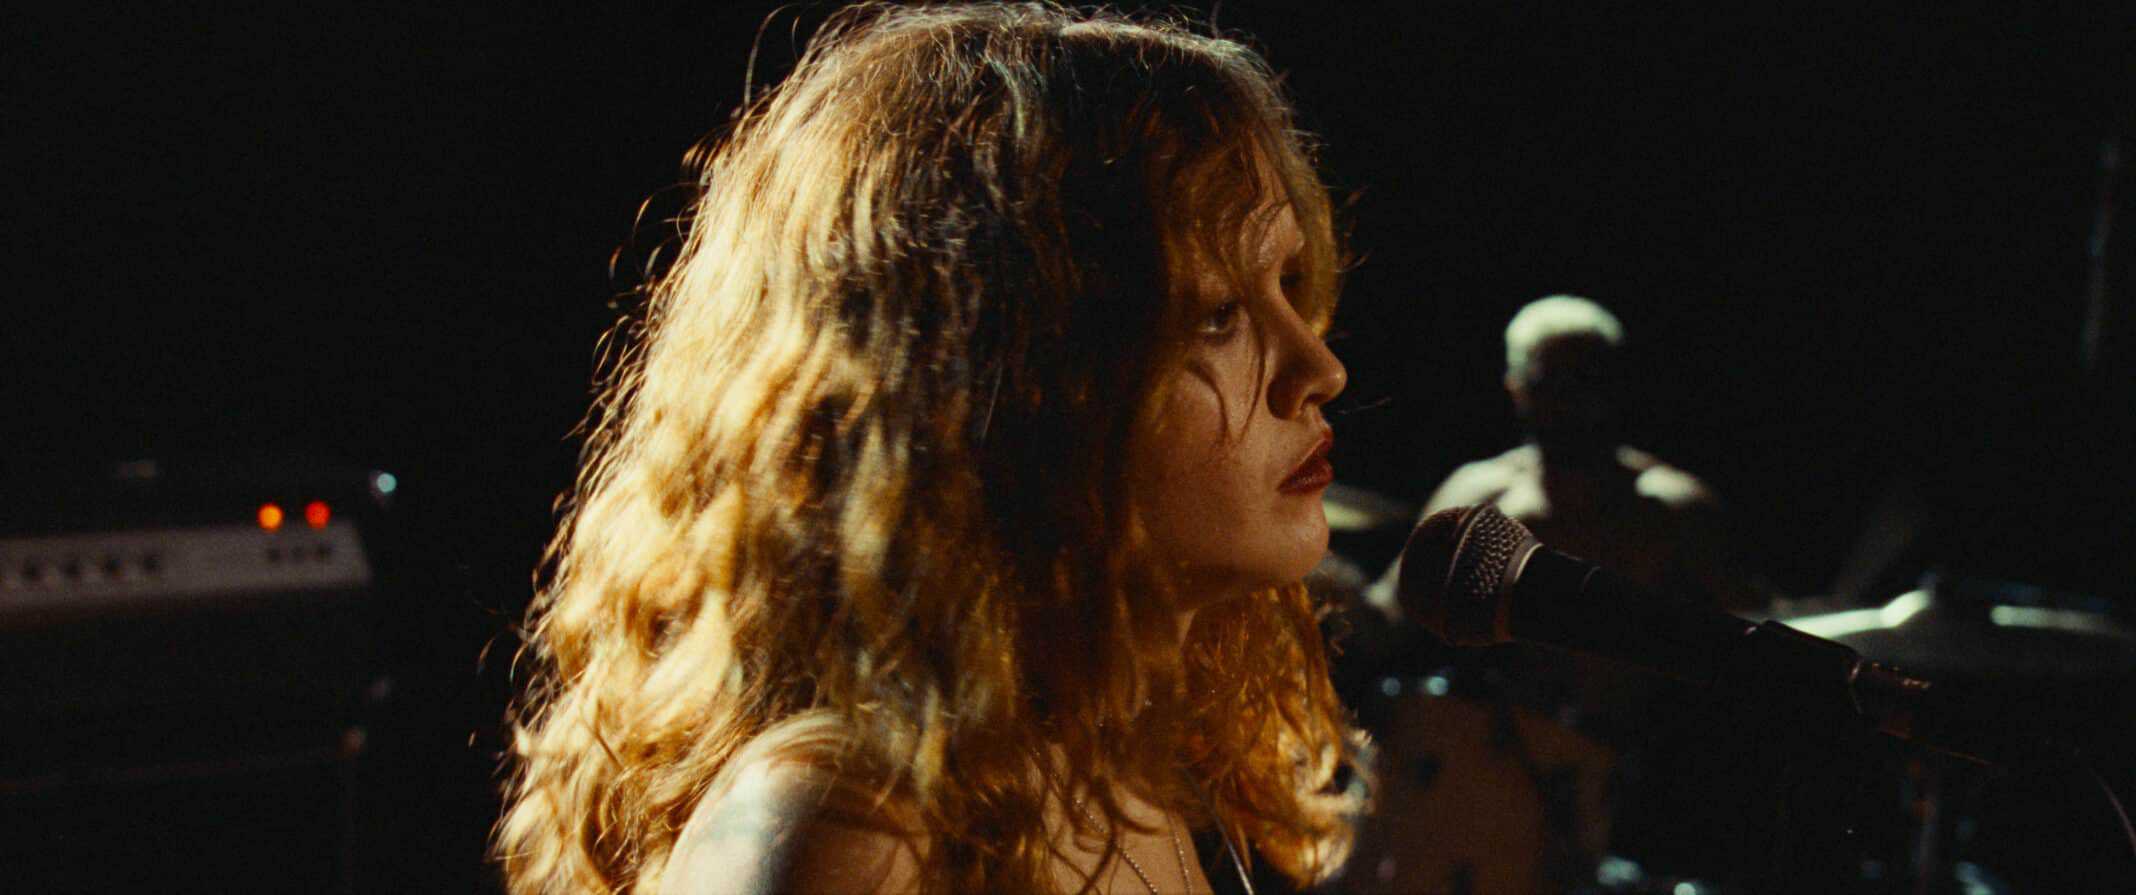 Olivia Cooke as Lou in Sound of Metal